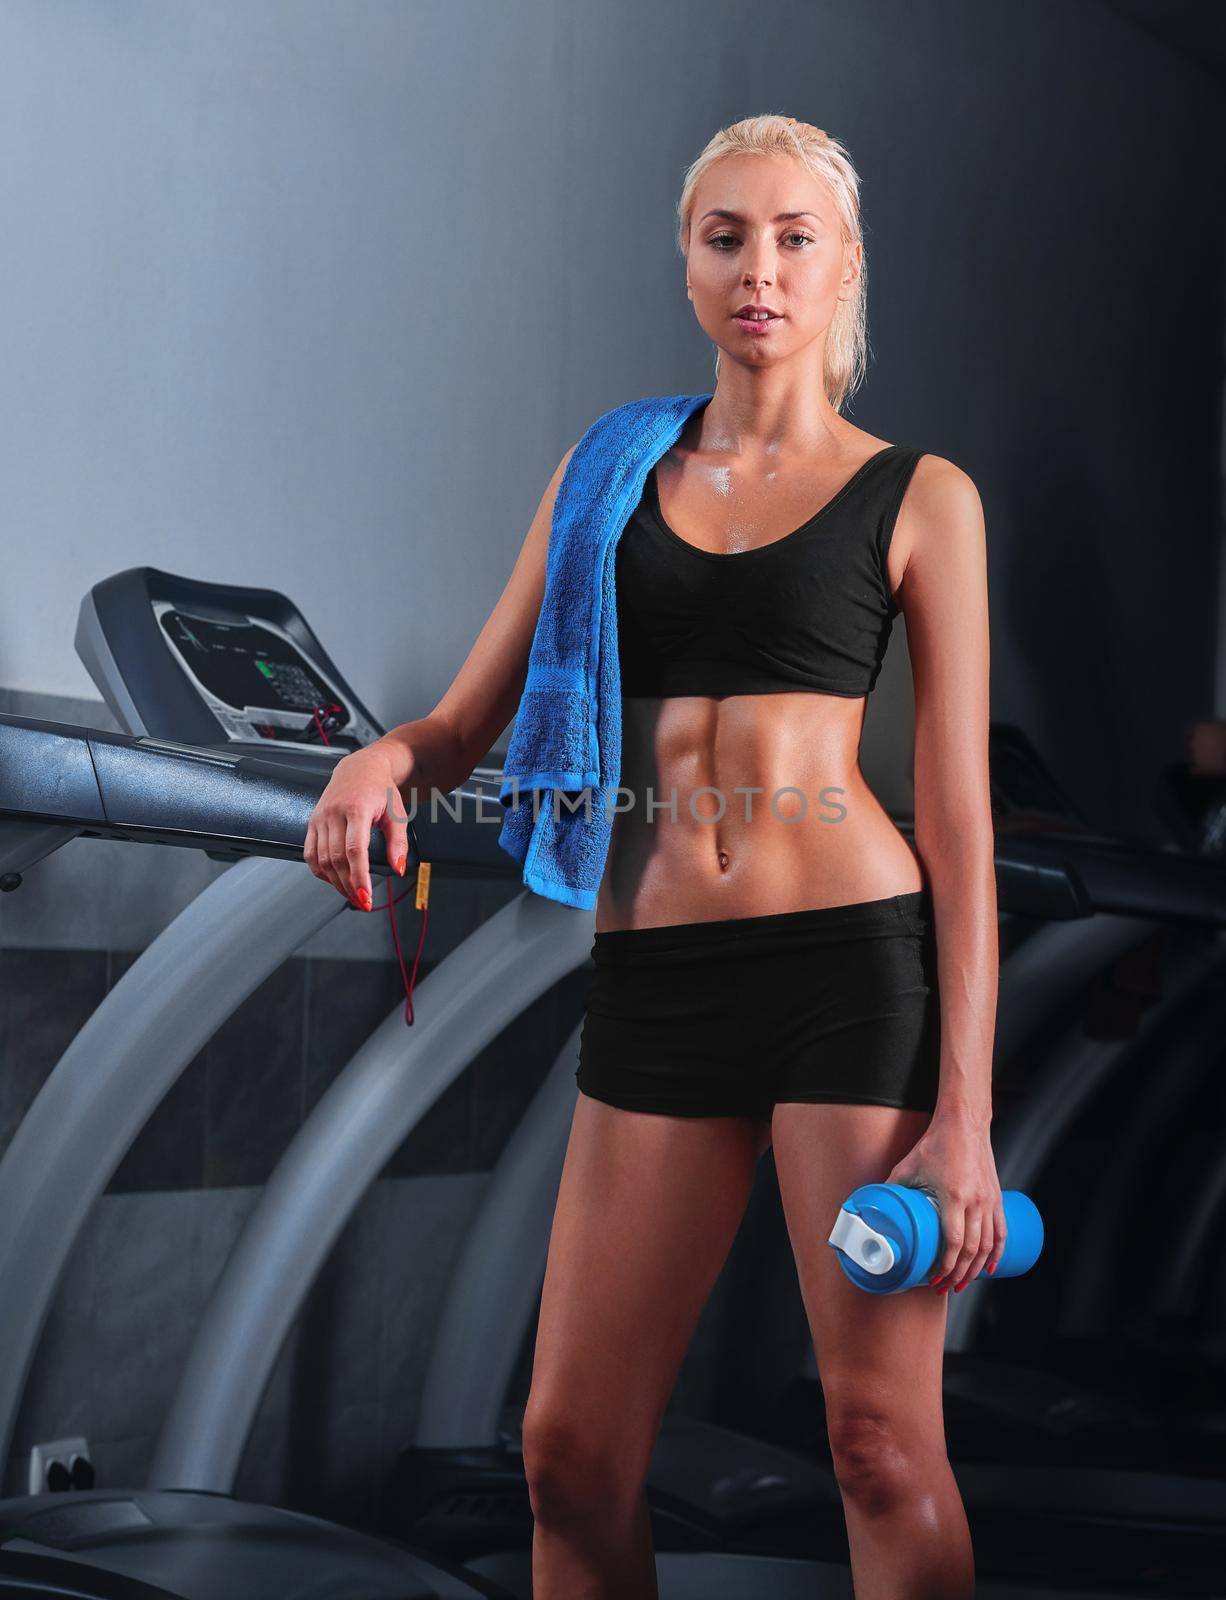 Vertical portrait of a gorgeous blonde fitness woman smiling to the camera standing near treadmill after her workout at the gym resting relaxing lifestyle happiness towel water body strong abs muscles.